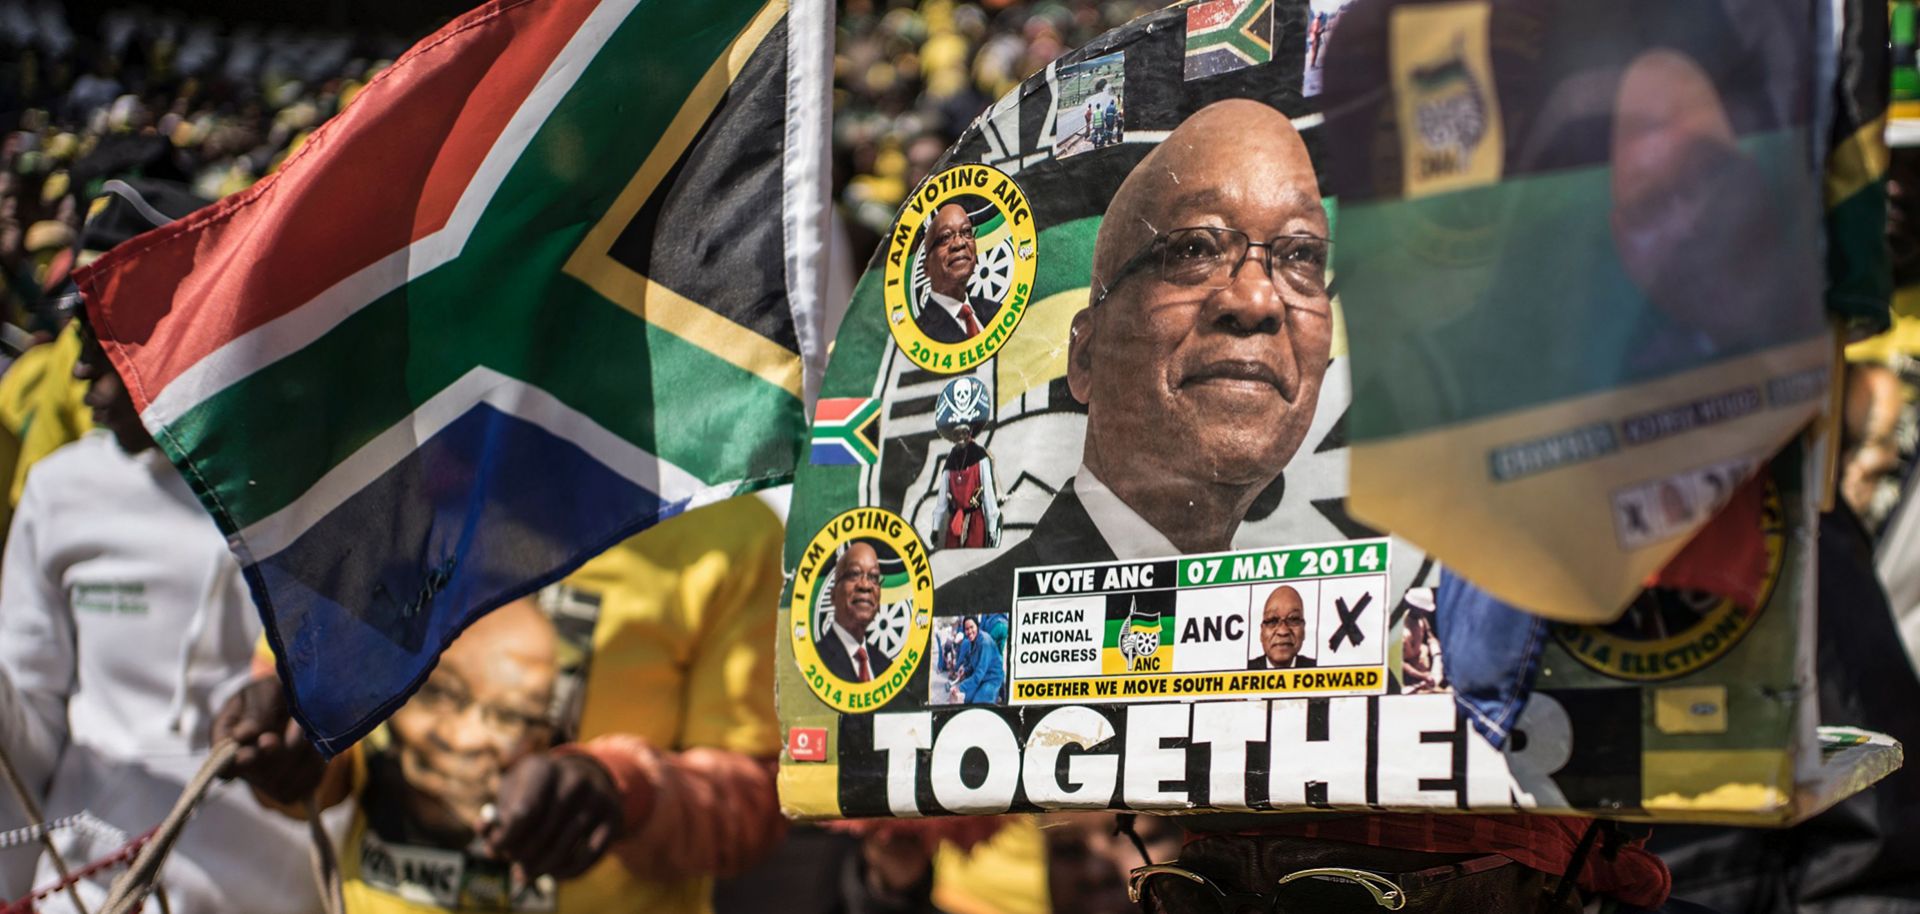 An African National Congress rally July 31 in Johannesburg, South Africa, aimed at shoring up support in advance of Aug. 3 municipal elections. A poor showing in those races could bode ill for the ruling ANC and its leader, President Jacob Zuma.